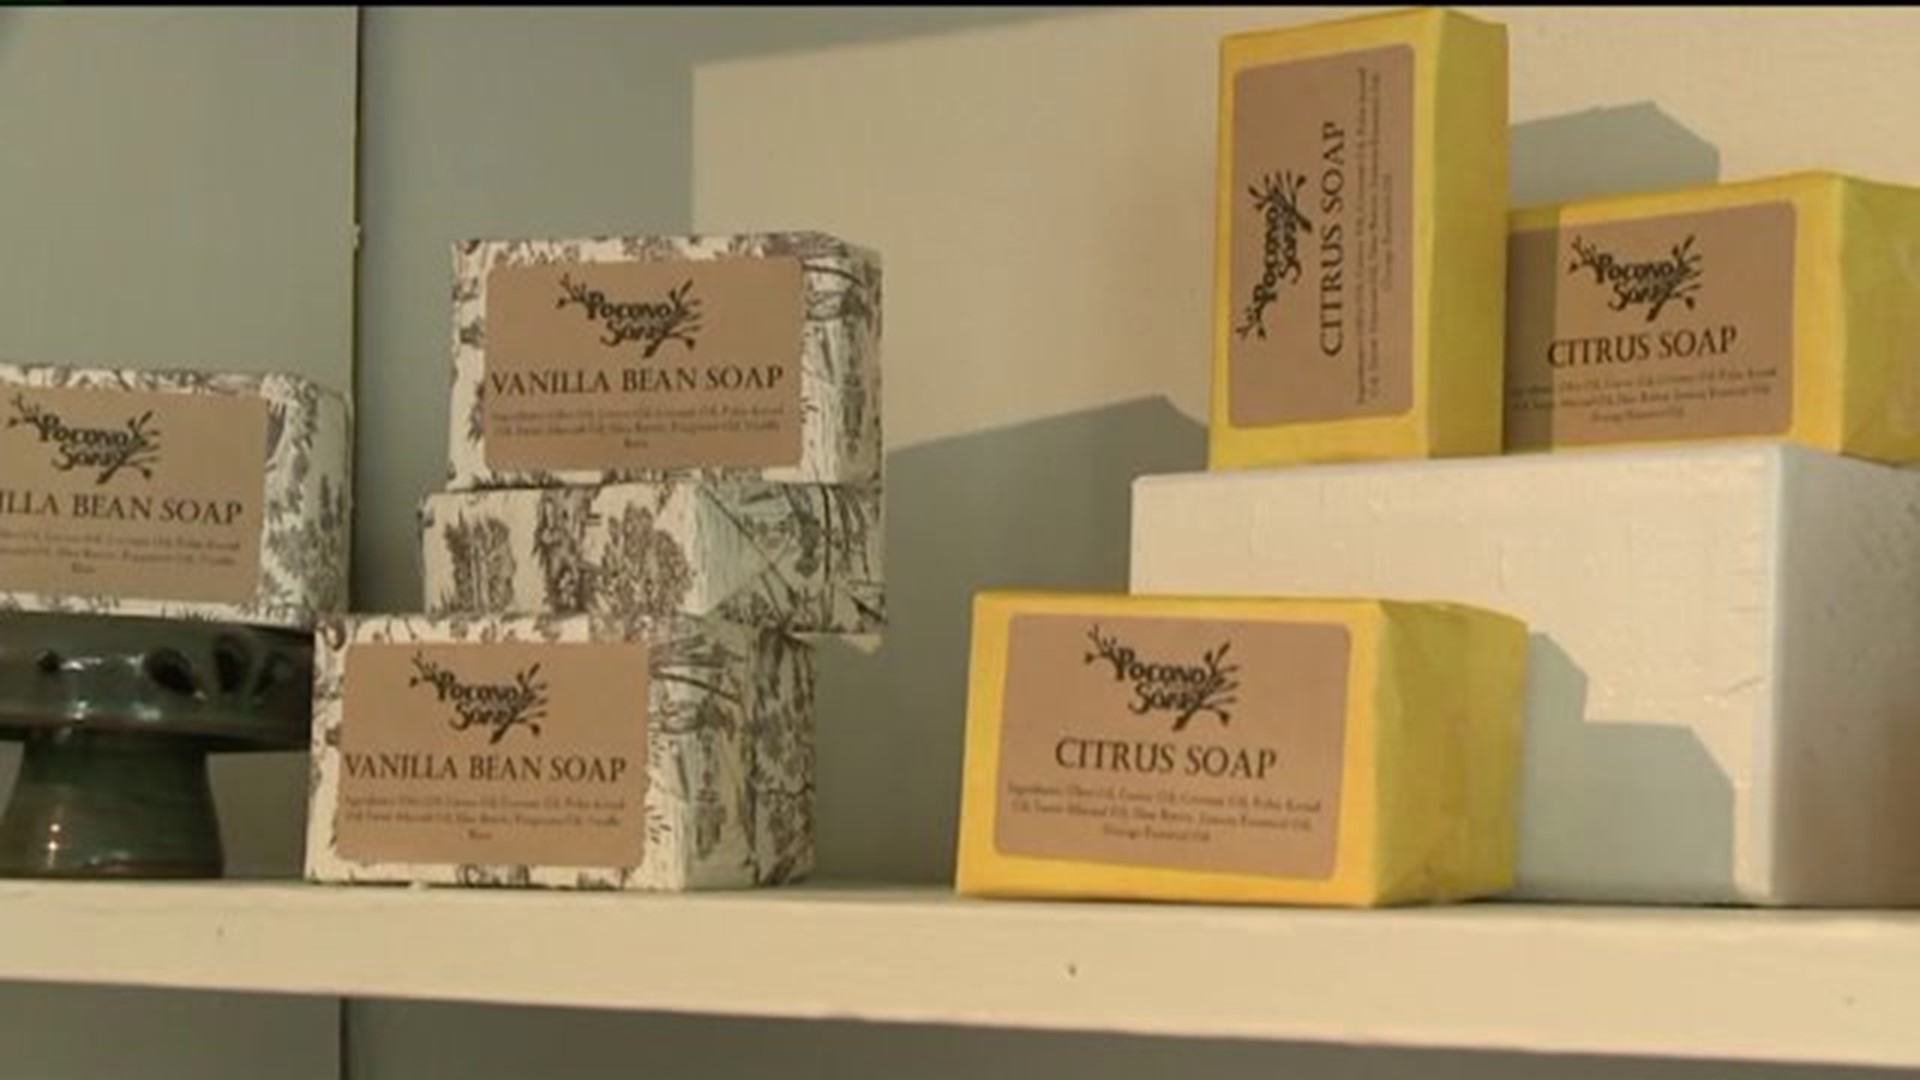 Owners Hope to Clean Up with New Soap Shop